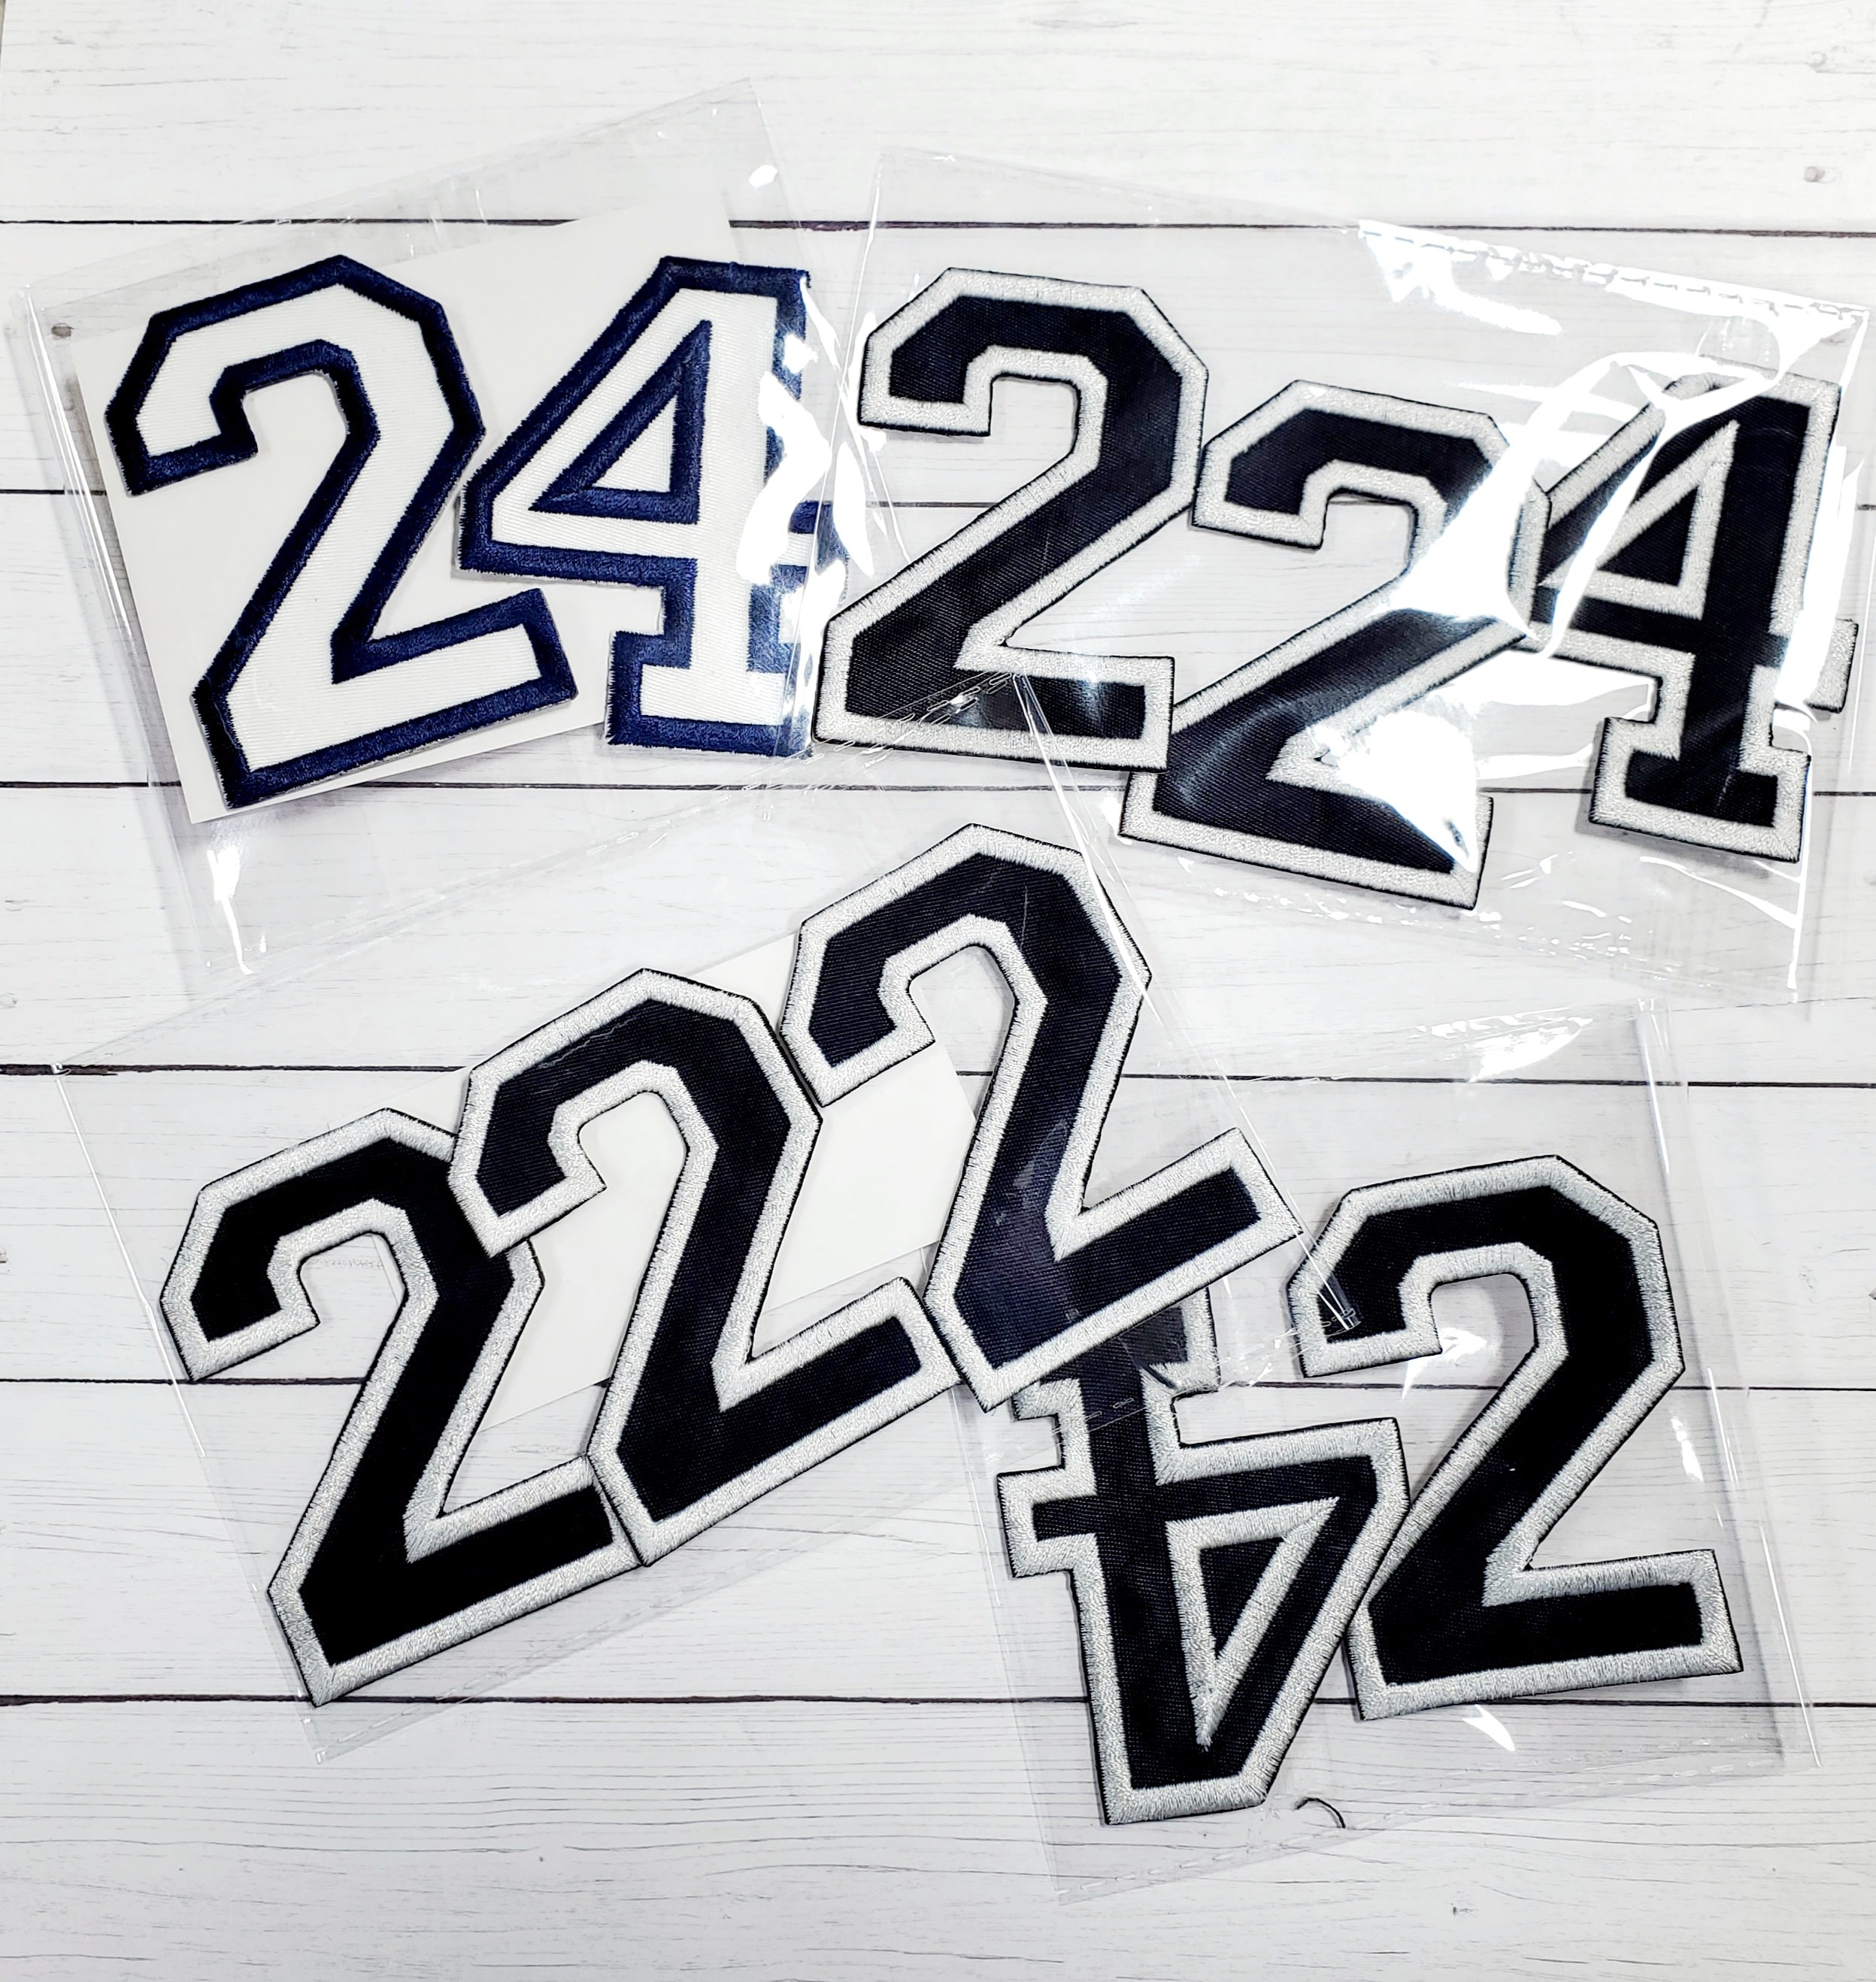 8" Twill Number for Uniform or Jersey - Athletic/Collegiate Style, Iron on Patch, Twill Embroidered Outline